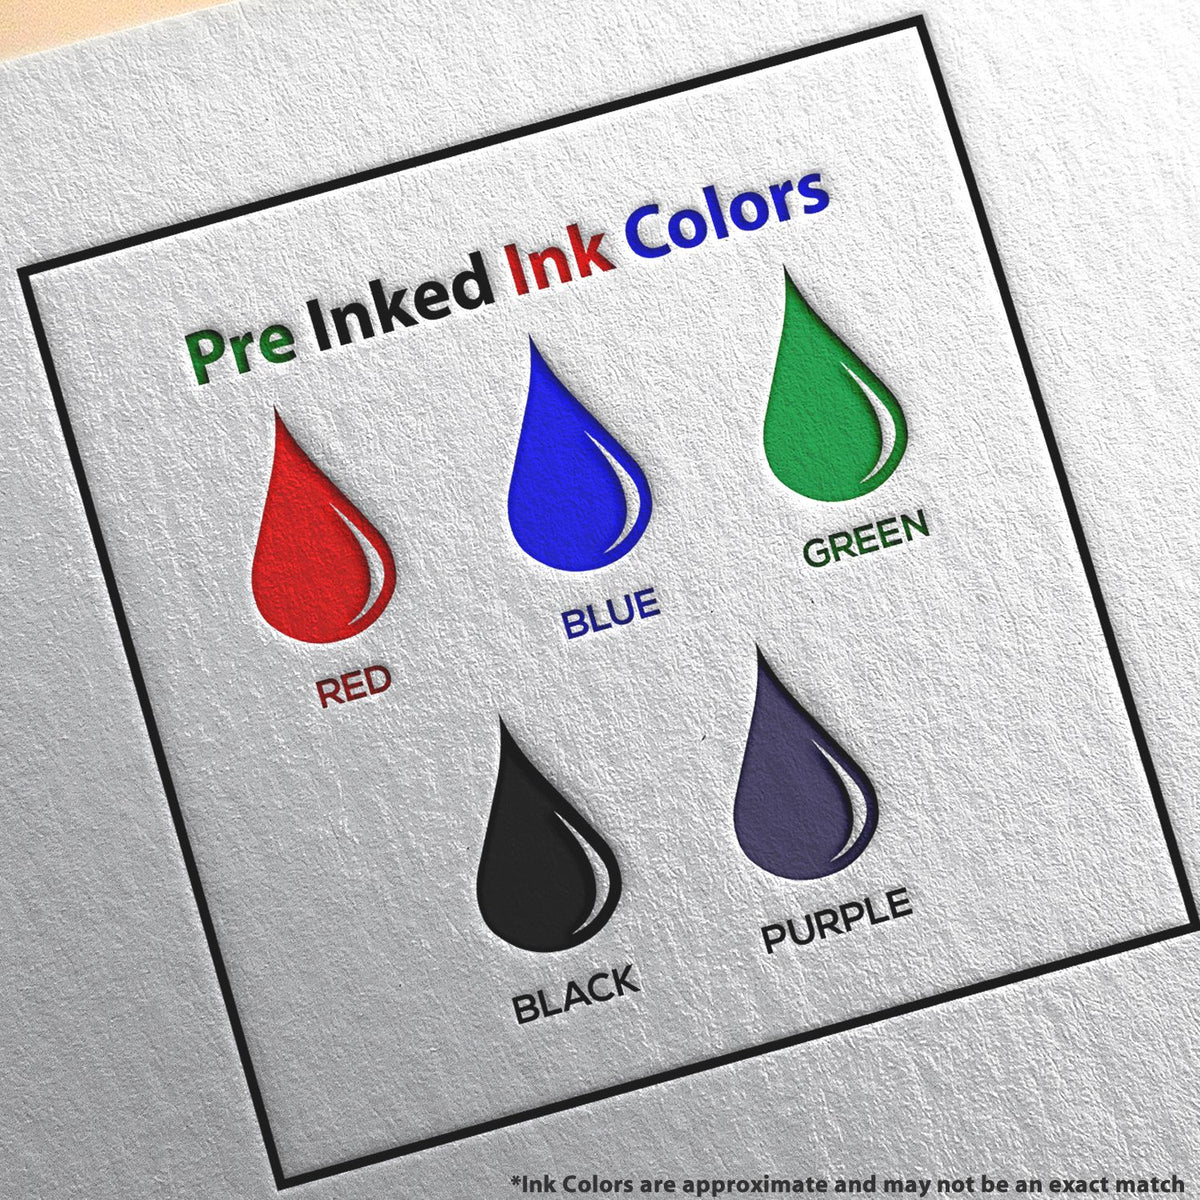 A picture showing the different ink colors or hues available for the Slim Pre-Inked Louisiana Landscape Architect Seal Stamp product.